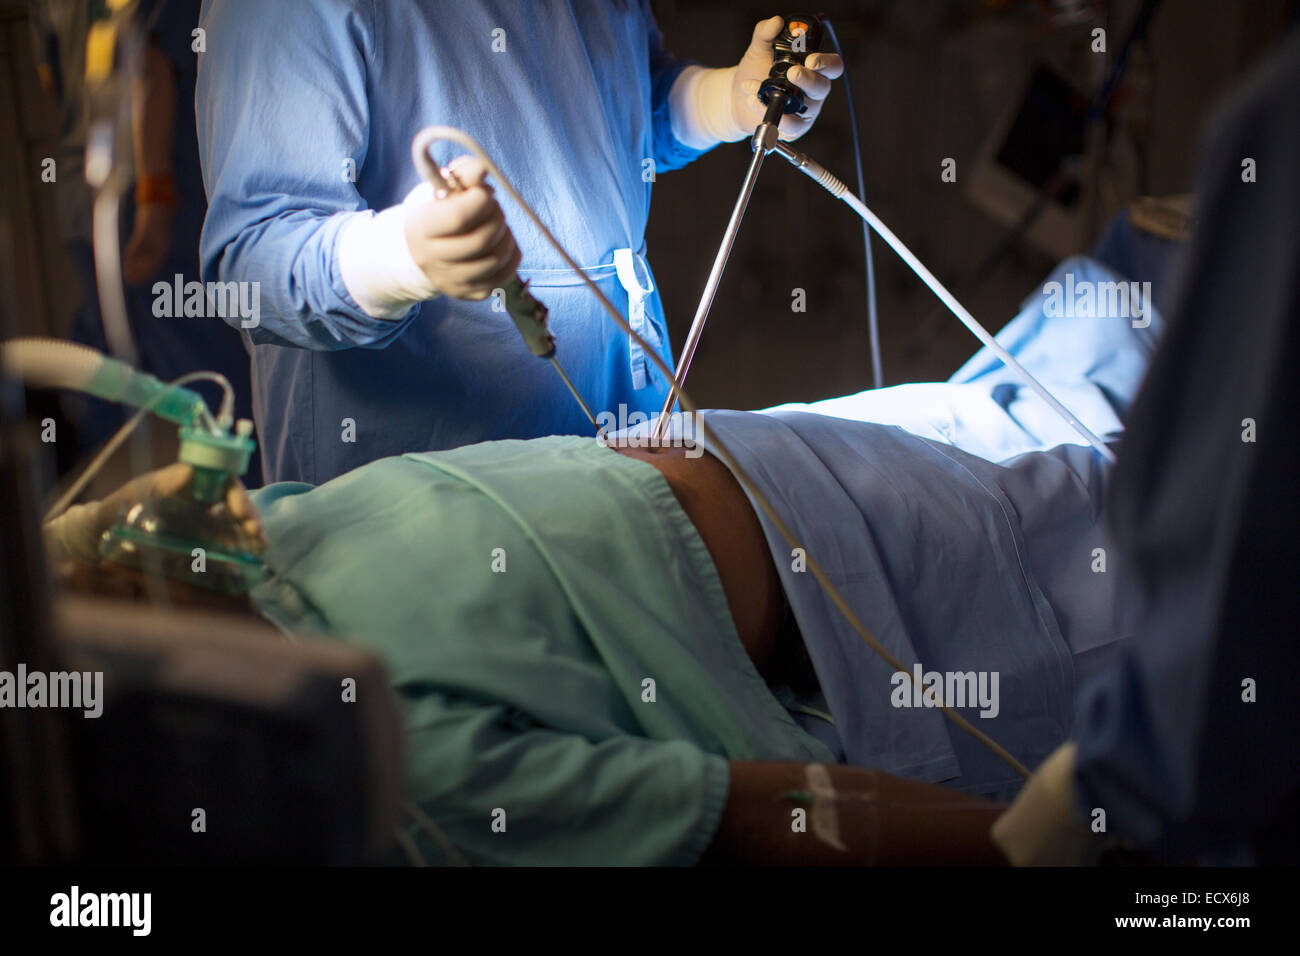 Surgeon holding medical tools and performing laparoscopic surgery in operating theater Stock Photo